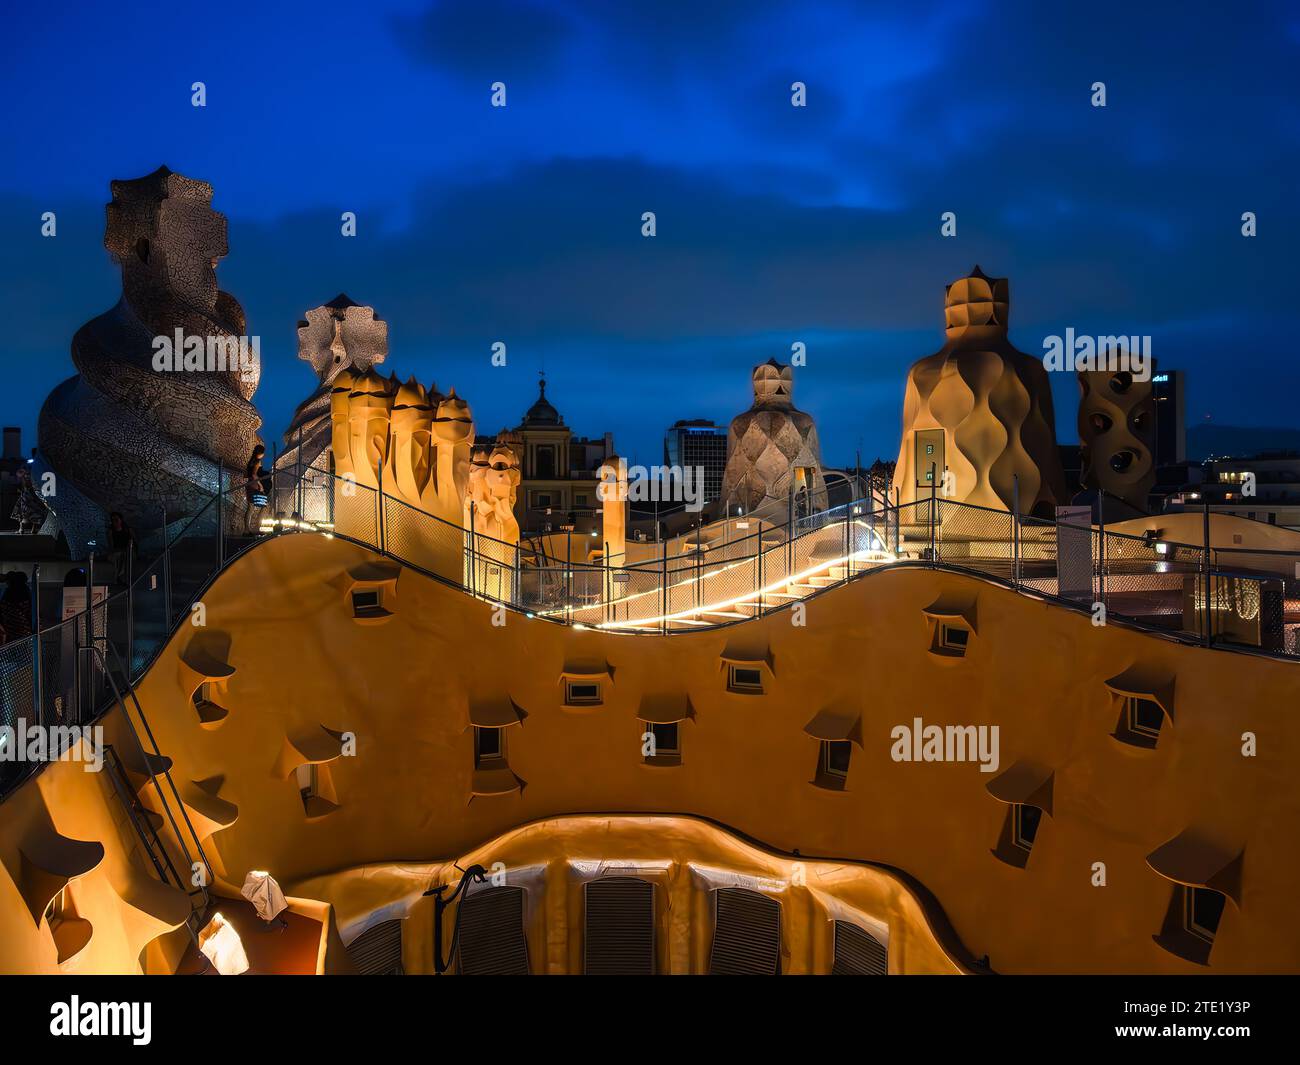 Barcelona, Spain - October 7, 2023: Illuminated roof sculptures - ventilation shafts - of Casa Mila, also called La Pedrera, made by the Catalan archi Stock Photo